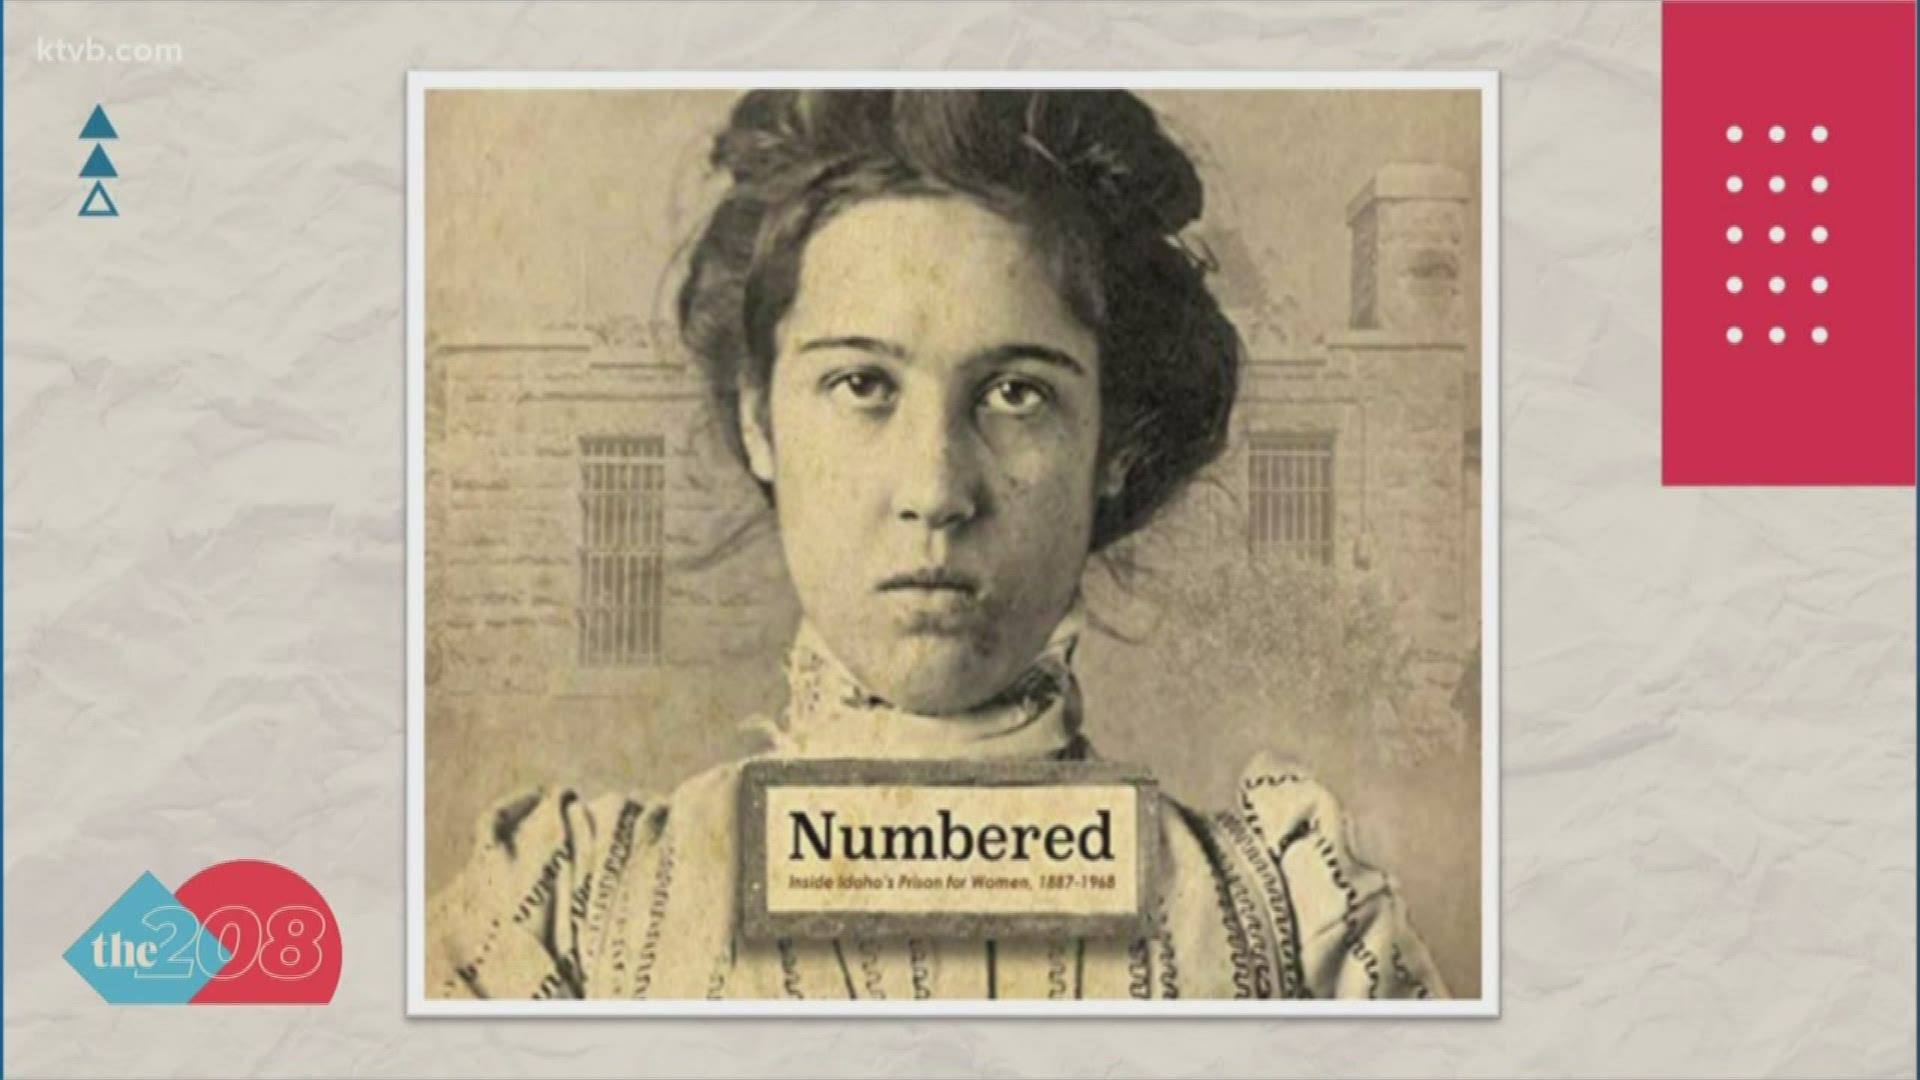 The book titled "Numbered: Inside Idaho's Prison for Women" tells the story about a fascinating part of Idaho's history that is rarely talked about.